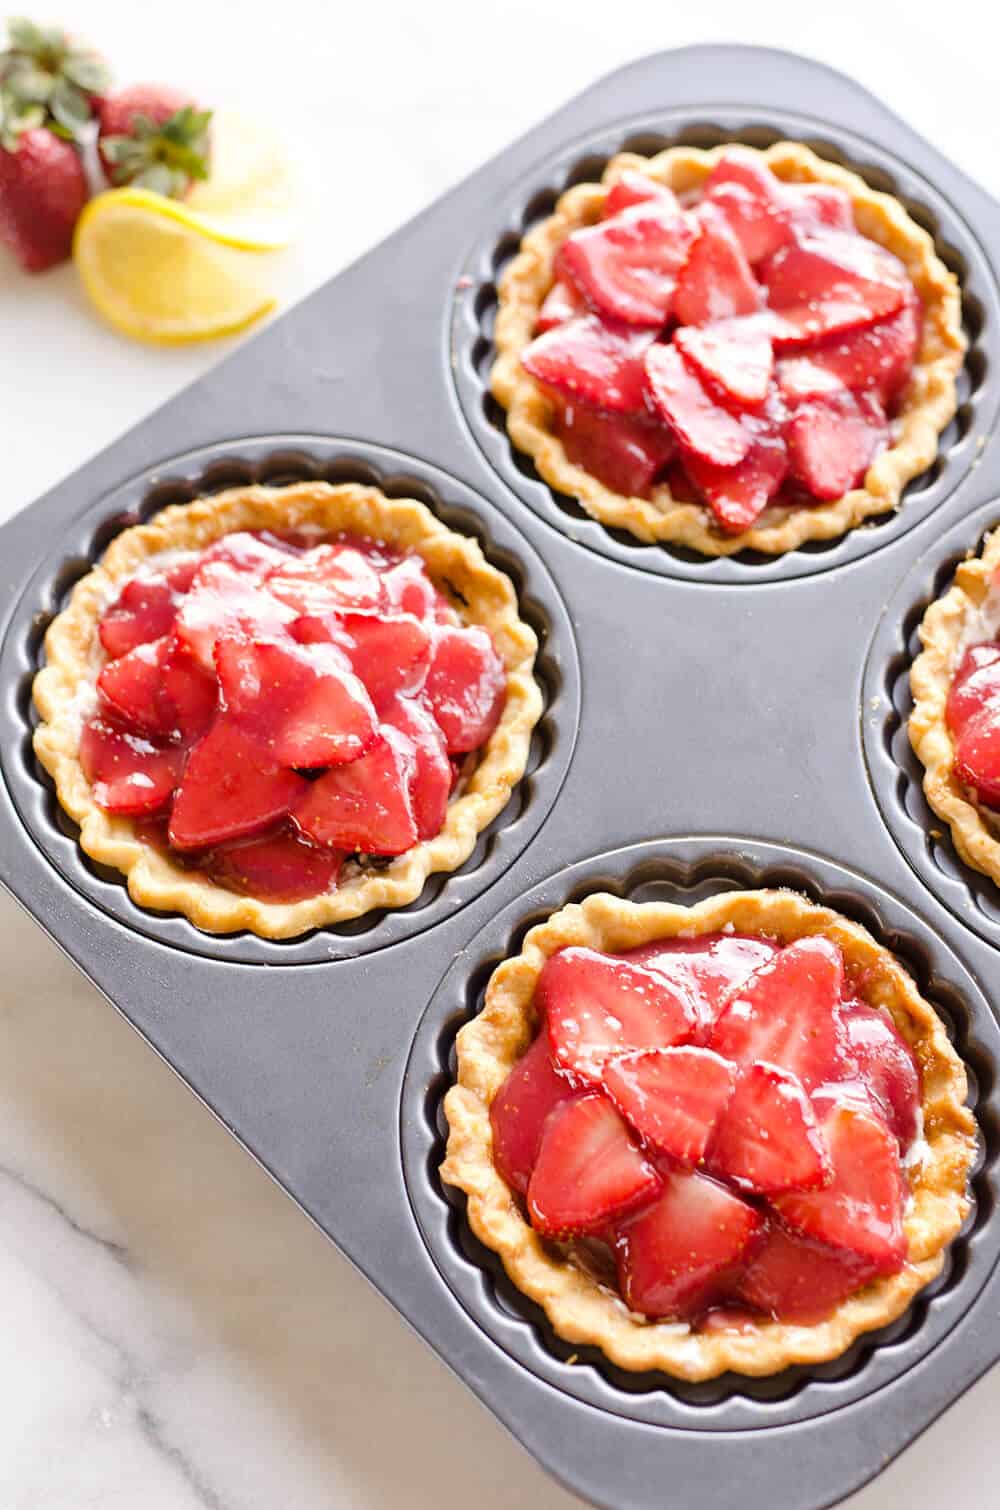 Mini Strawberry Lemon Pies are the perfect dessert recipe to serve your party guests for an individual sweet they will love! A flaky pie crust is topped with a lemon cream cheese layer, fresh strawberries and a sweet strawberry lemon sauce for tons of great flavor and texture!